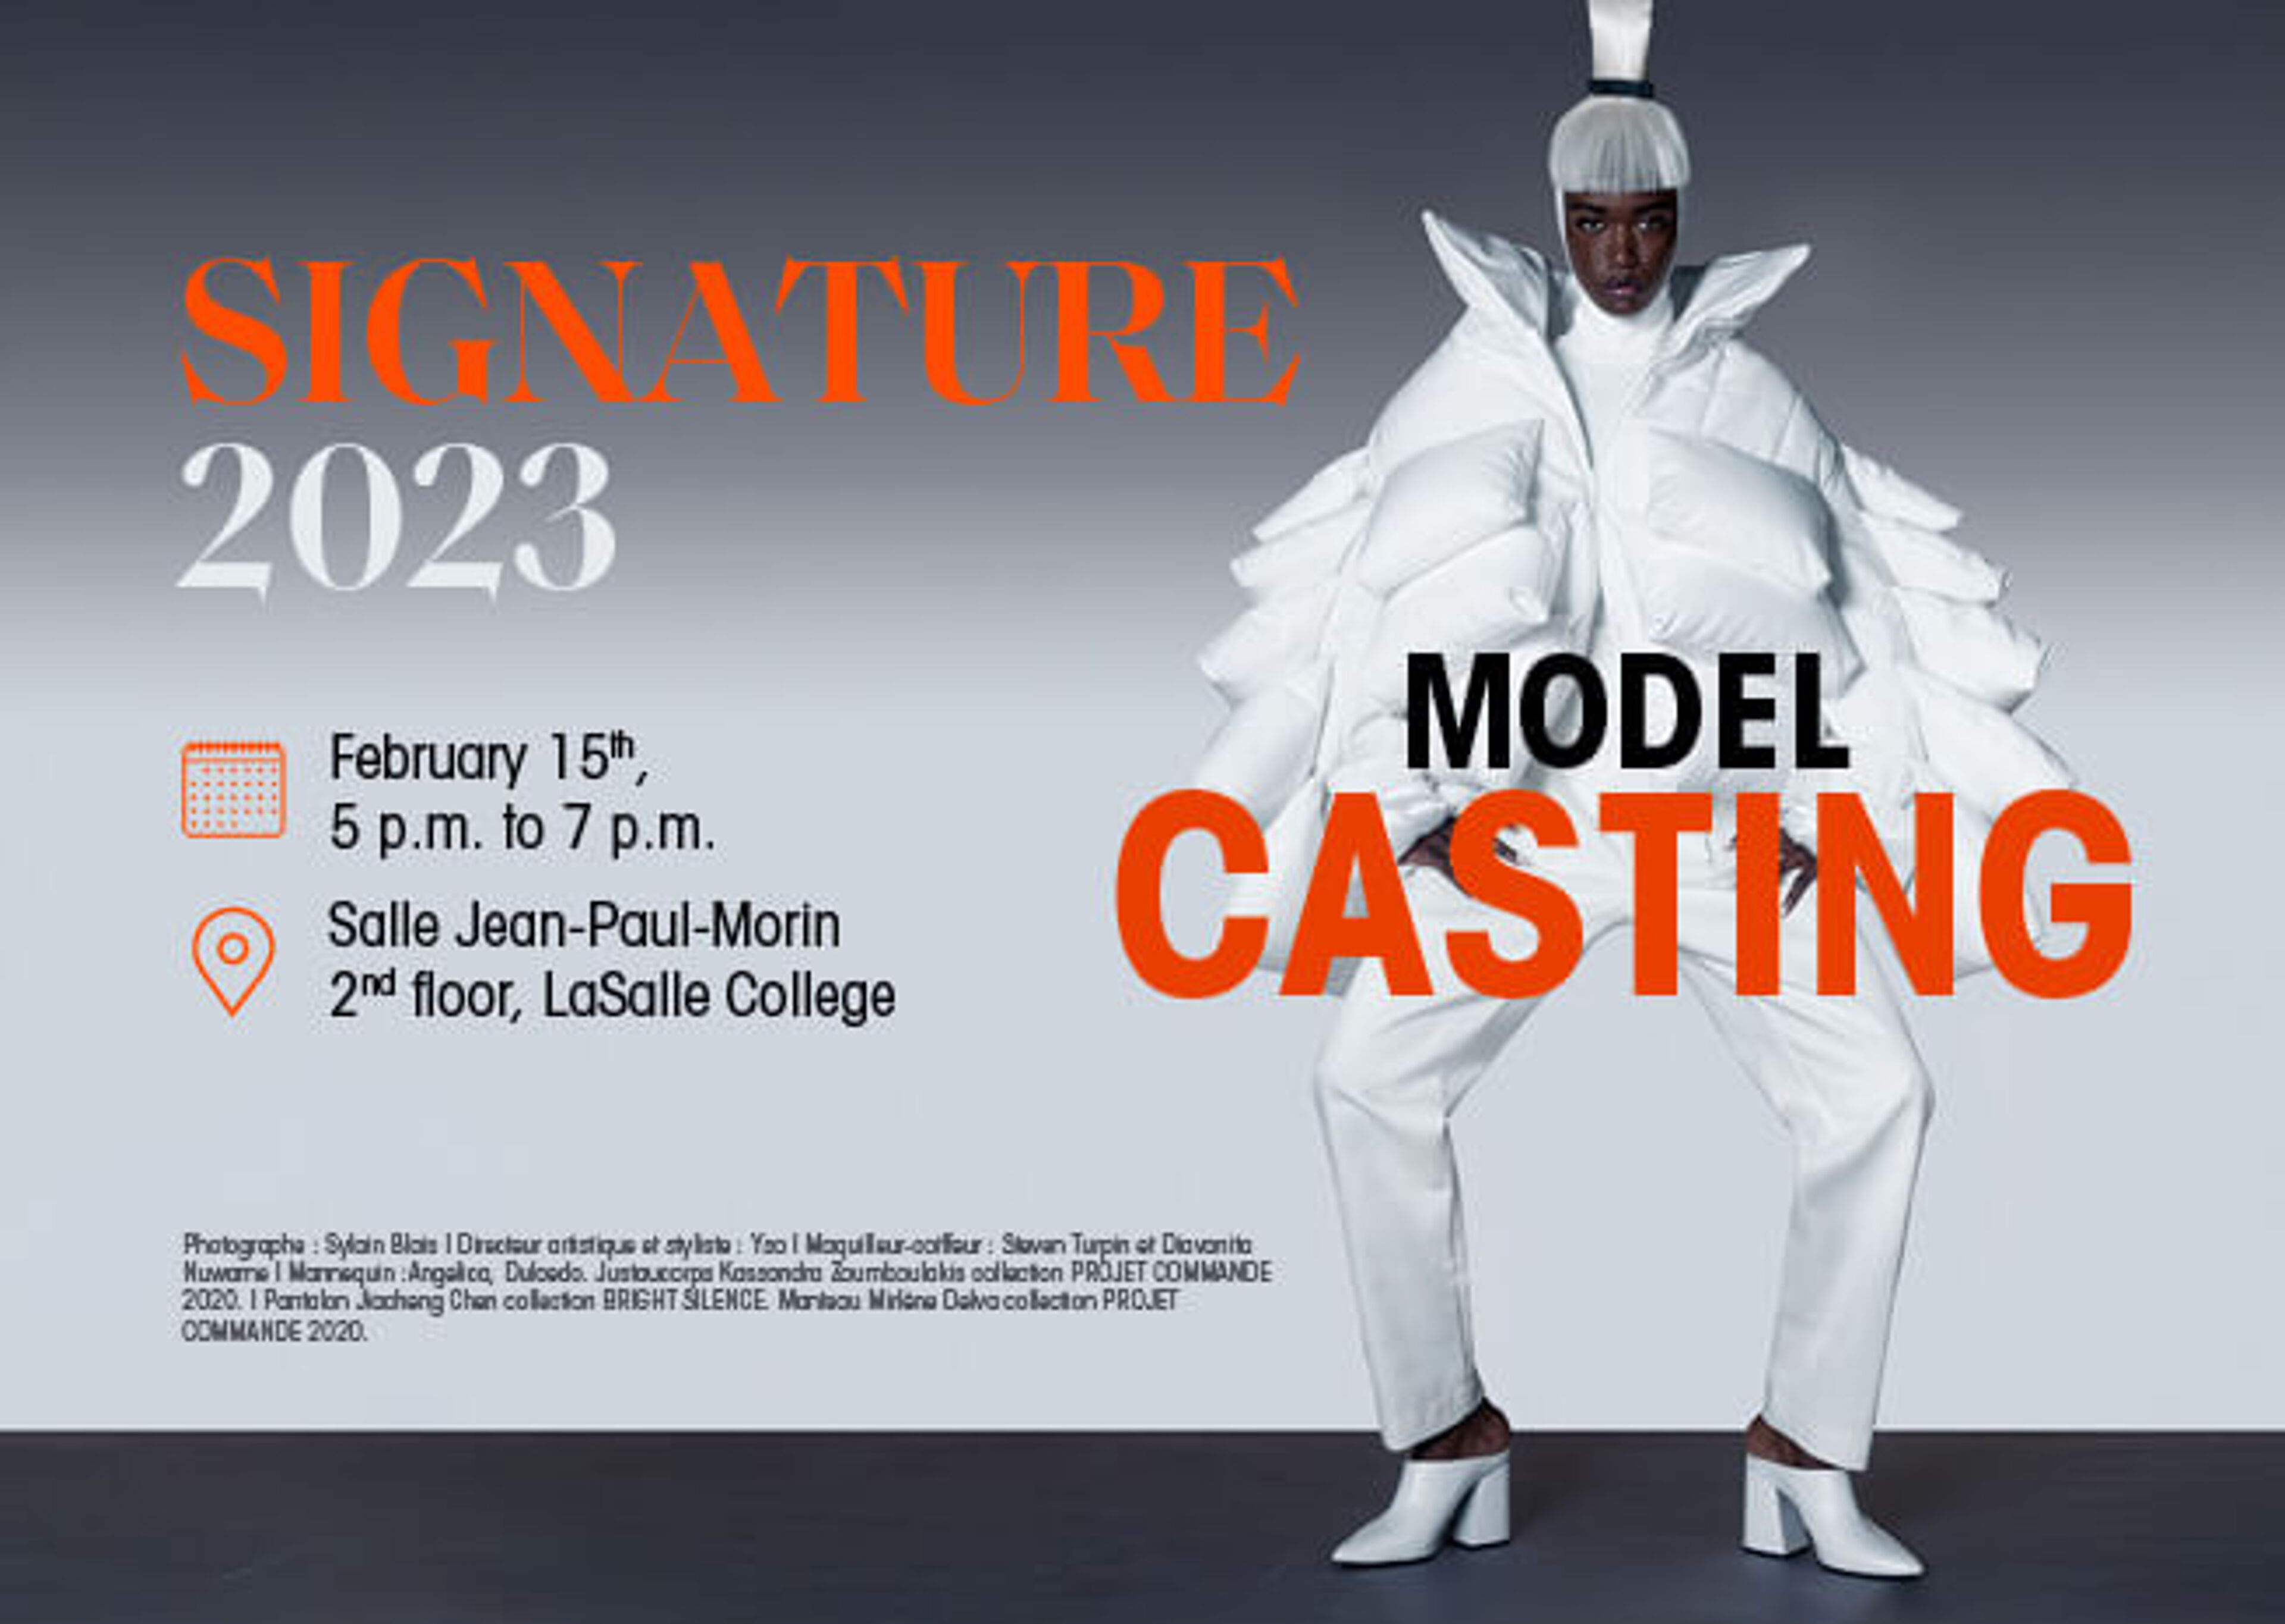 Announcement for a model casting event for SIGNATURE 2023 on February 15th at LaSalle College's Salle Jean-Paul-Morin, featuring a model in avant-garde attire.